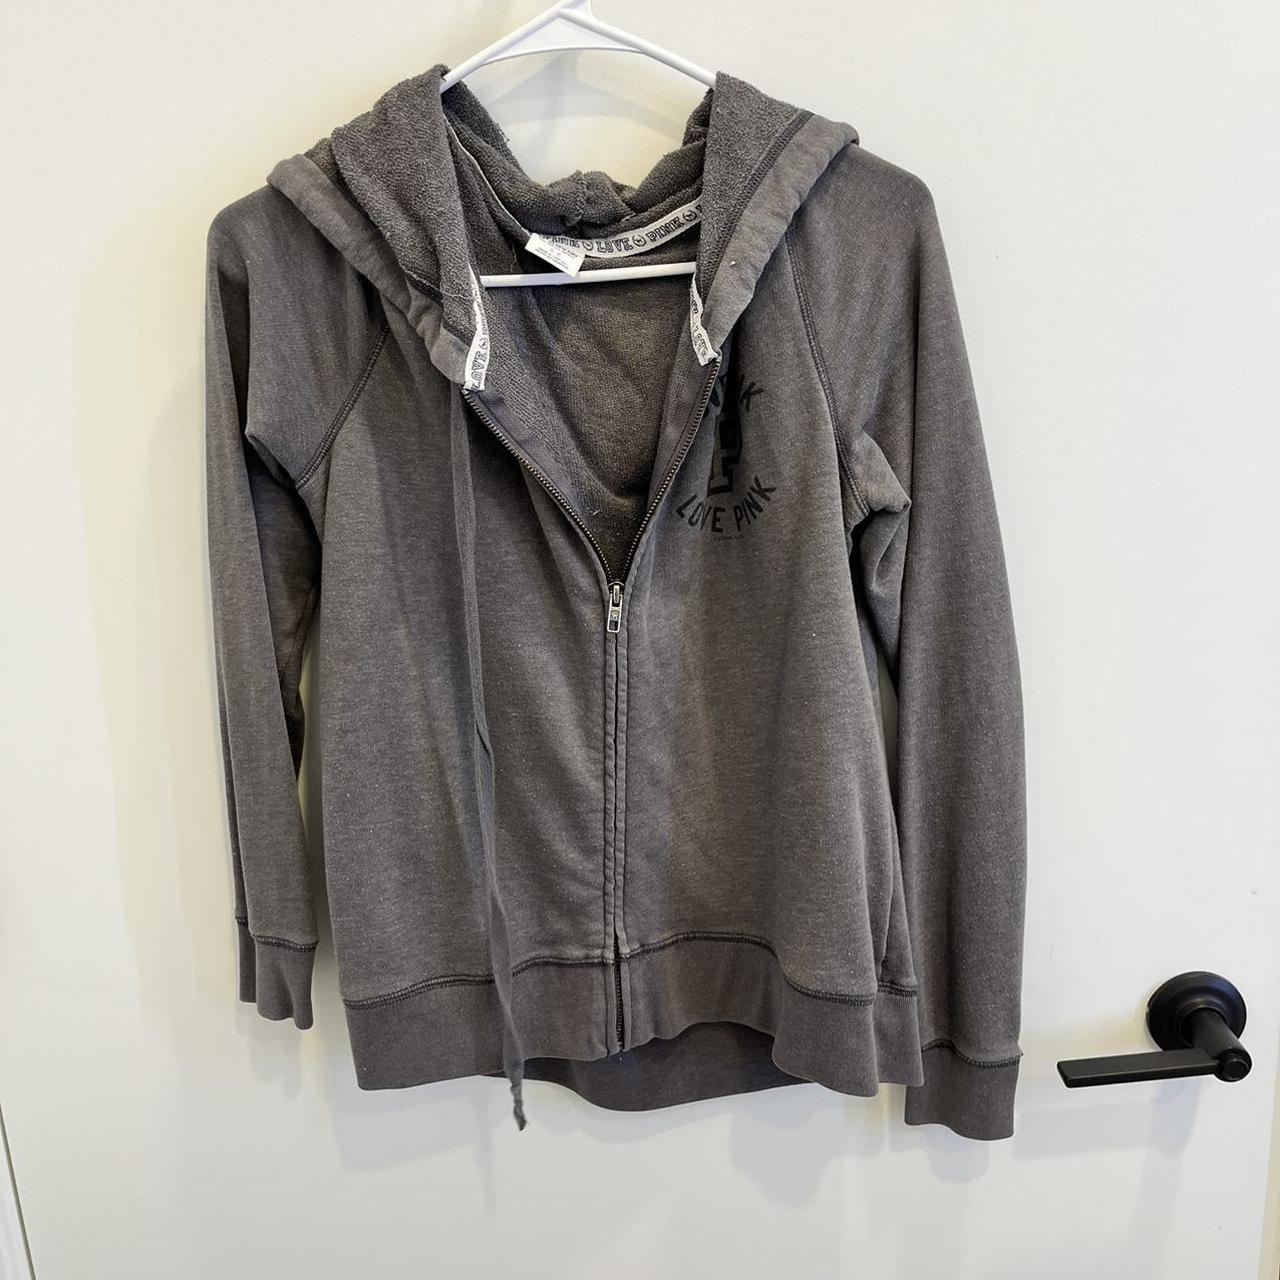 Product Image 1 - VS PINK gray zip up